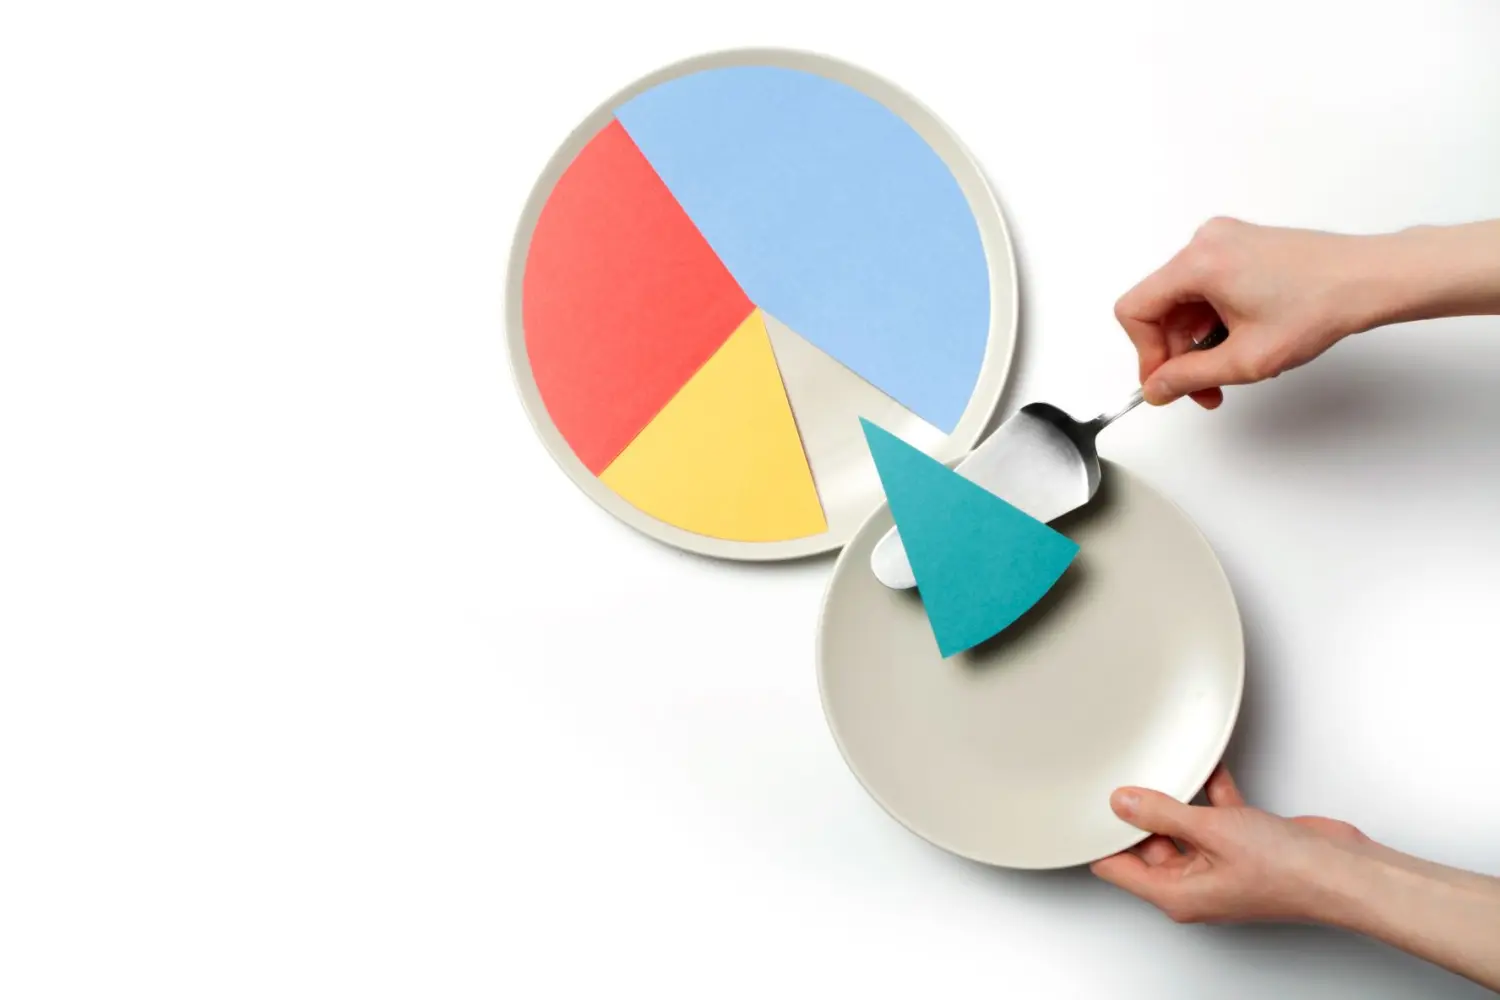 Image of hands moving a slice of a pie chart onto a plate